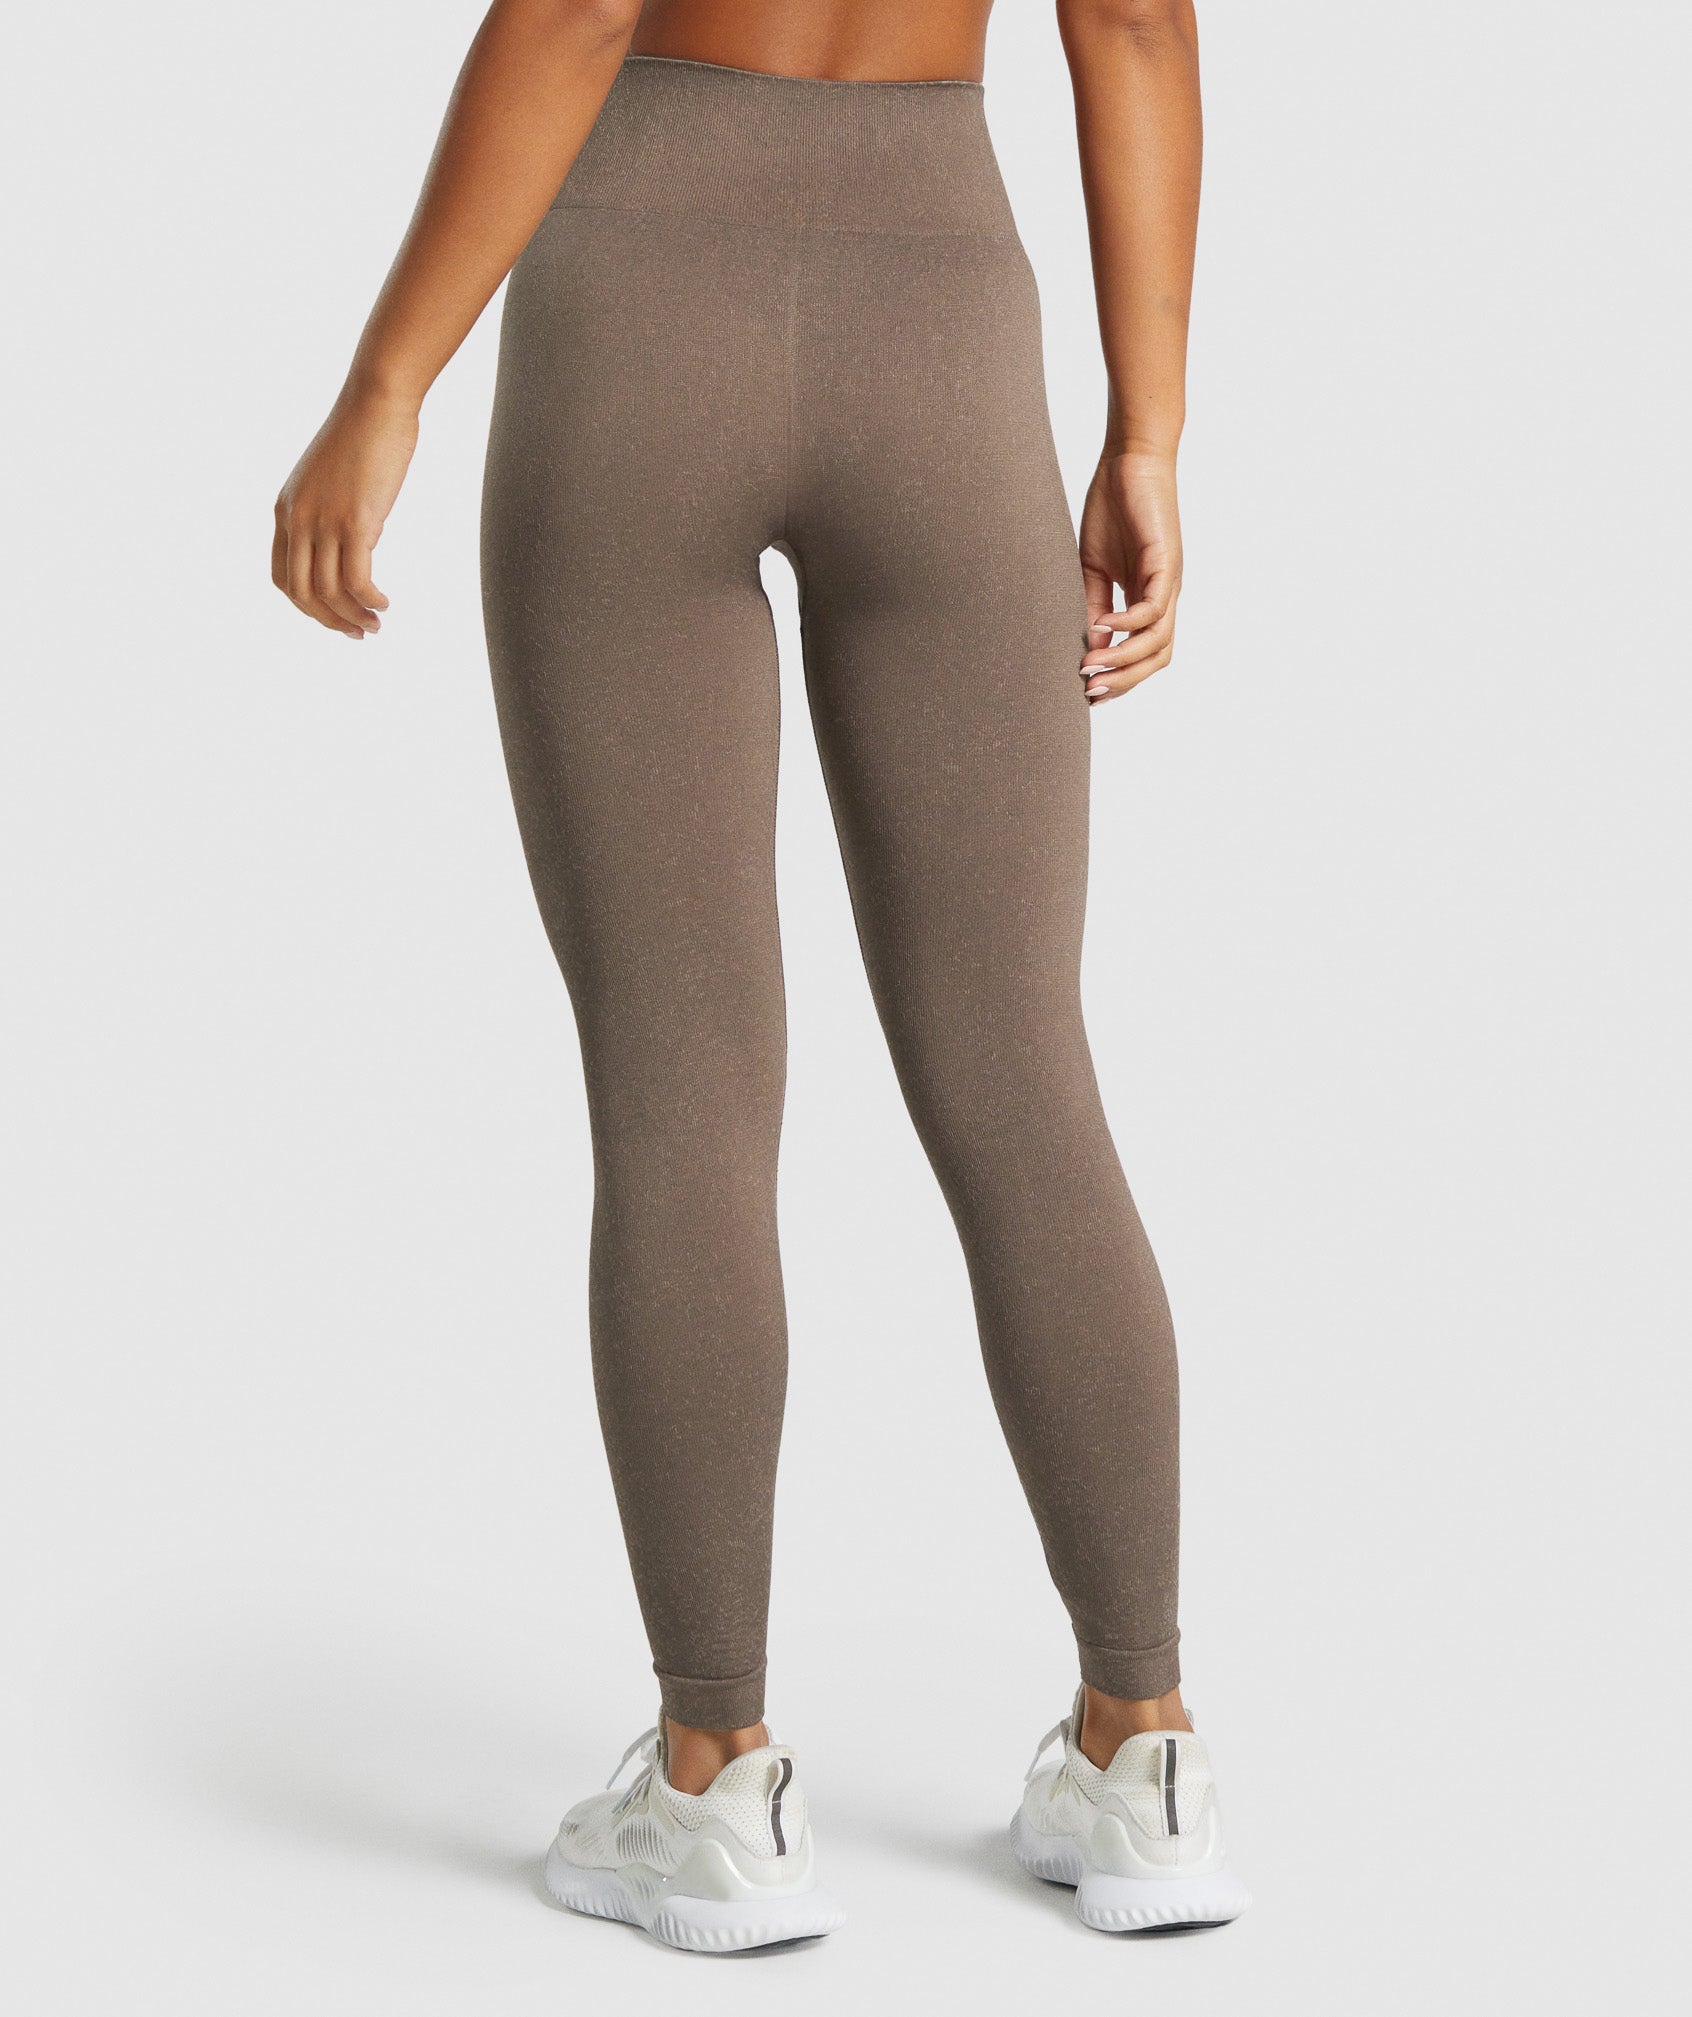 Gymshark Adapt Fleck Seamless Leggings Brown Size XS - $30 (50% Off Retail)  - From Addy